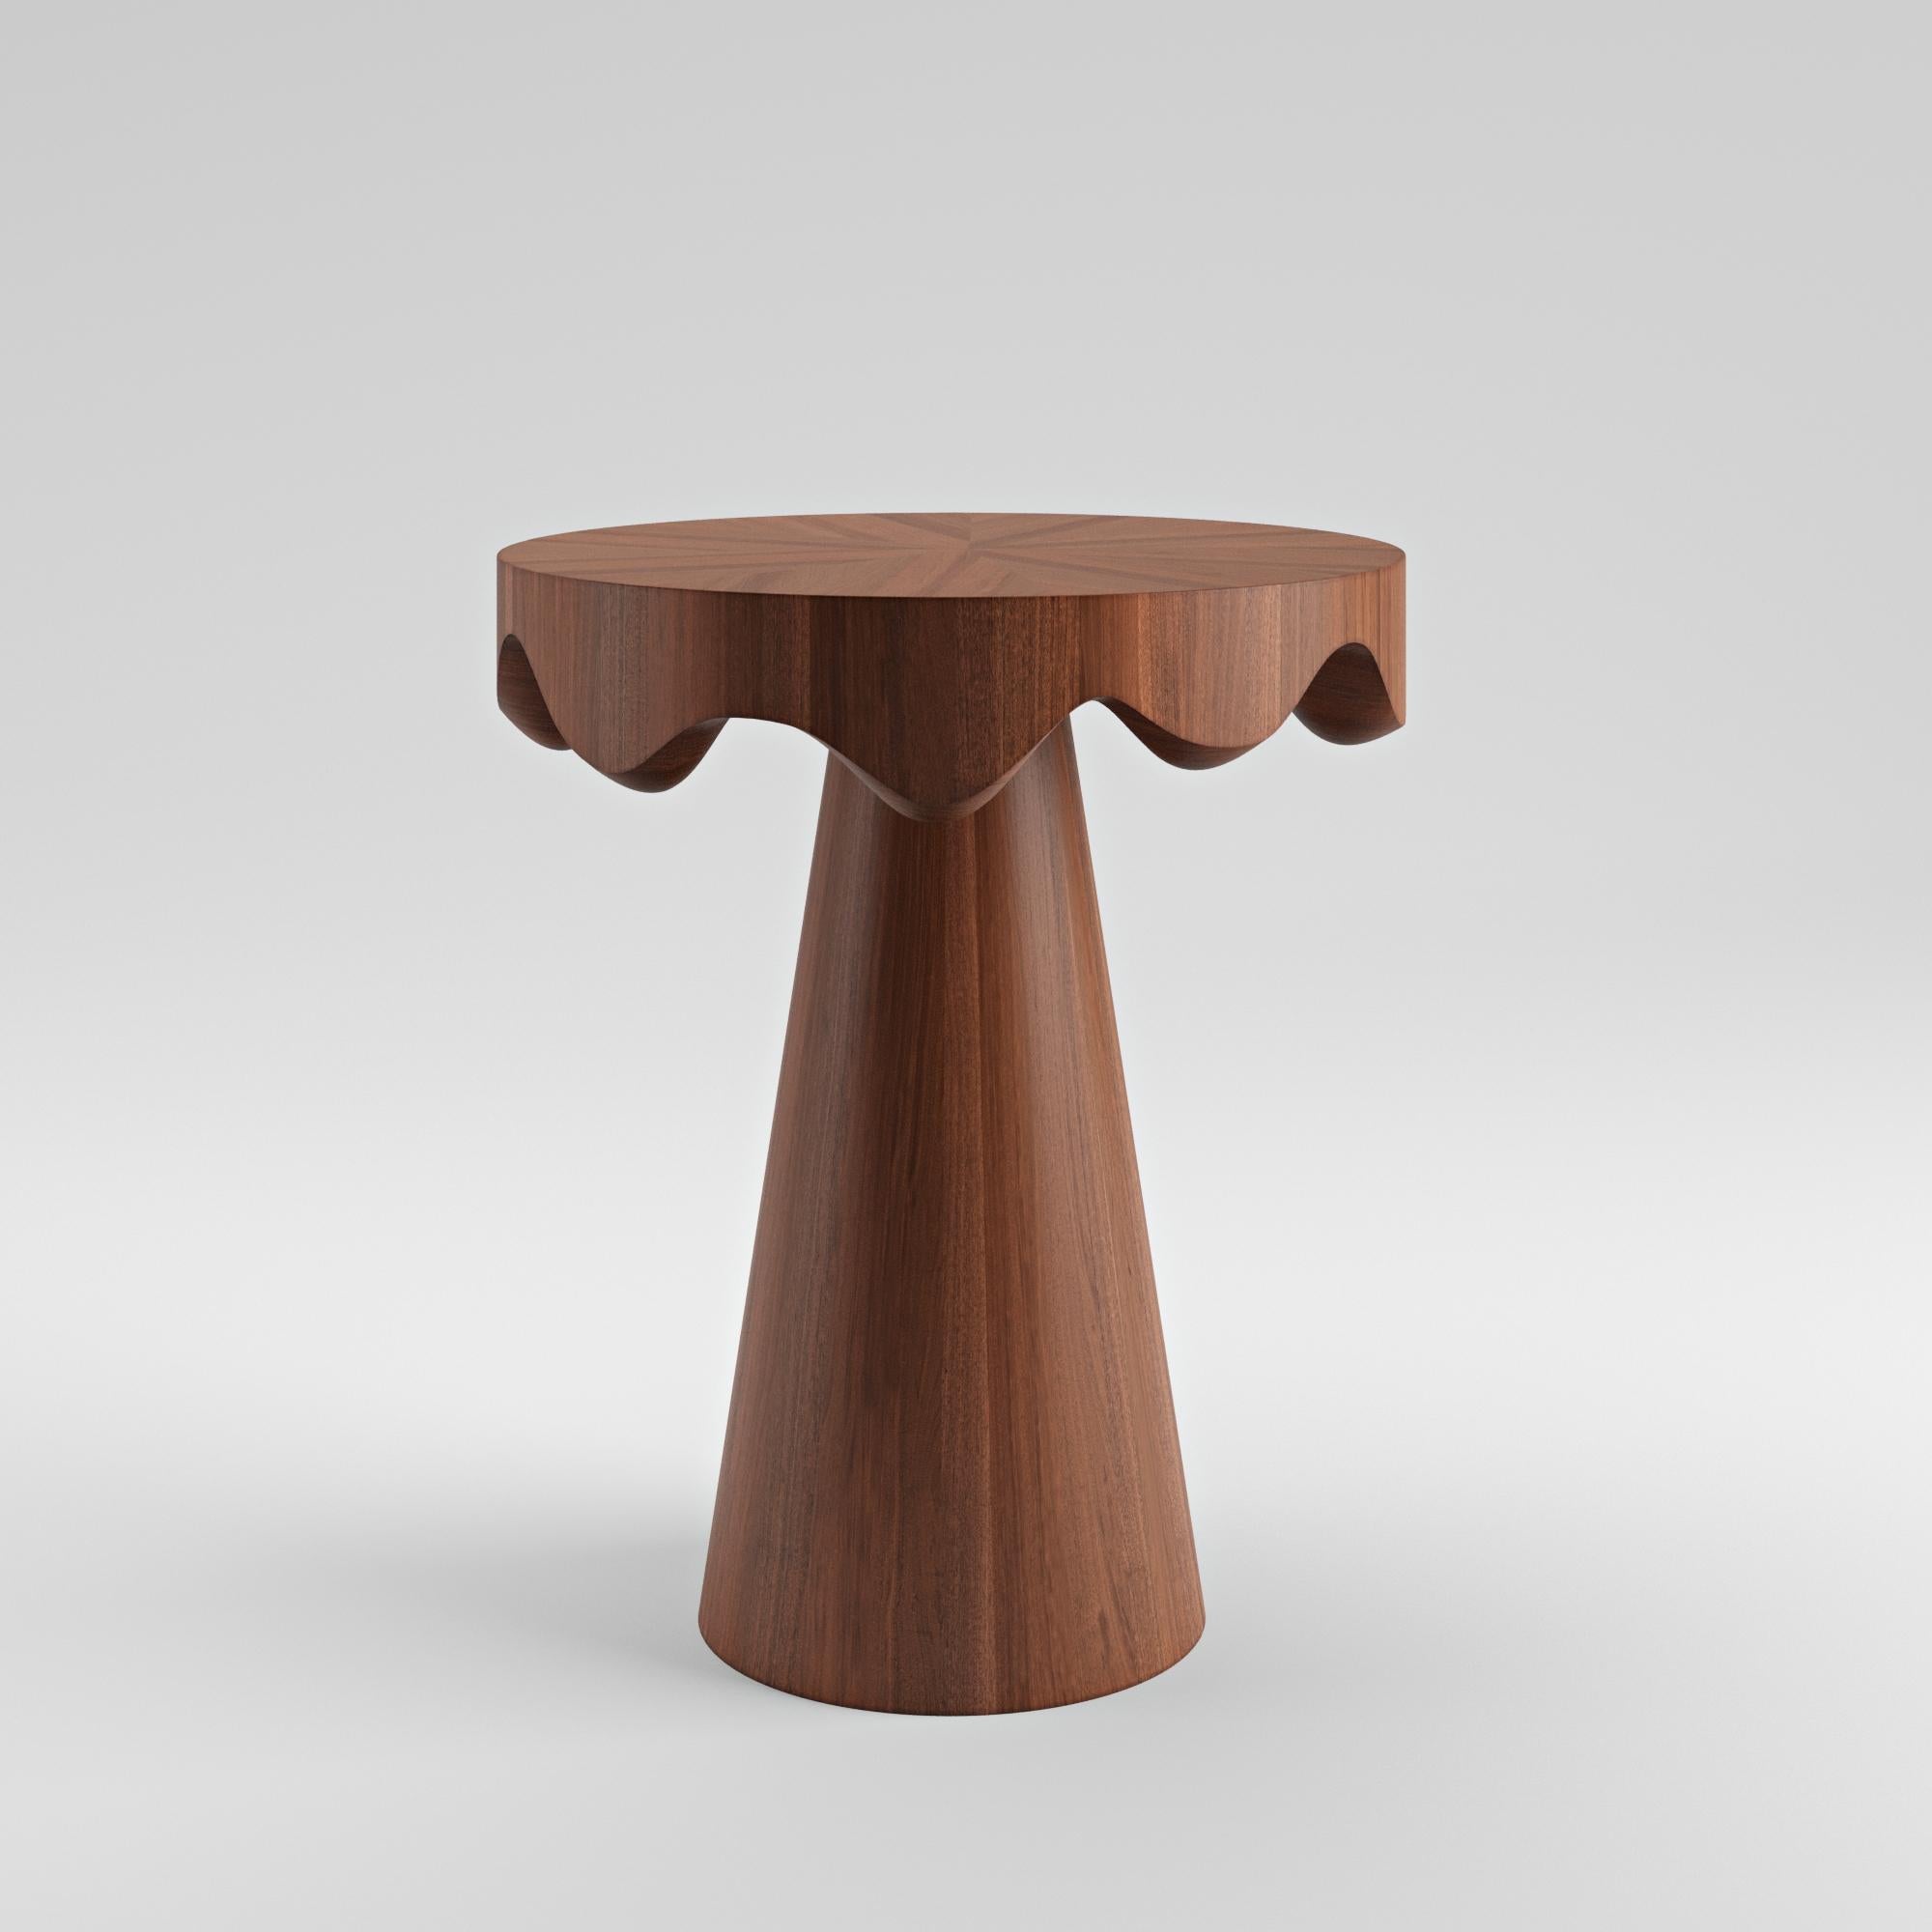 Made-to-order
Dripotlé Mahogany
Side table by T. Woon

The exquisite mahogany side table is indeed a manifestation of the designer's pristine aesthetics, boasting a captivating and curious appearance. Meticulously handcrafted by skilled artisans